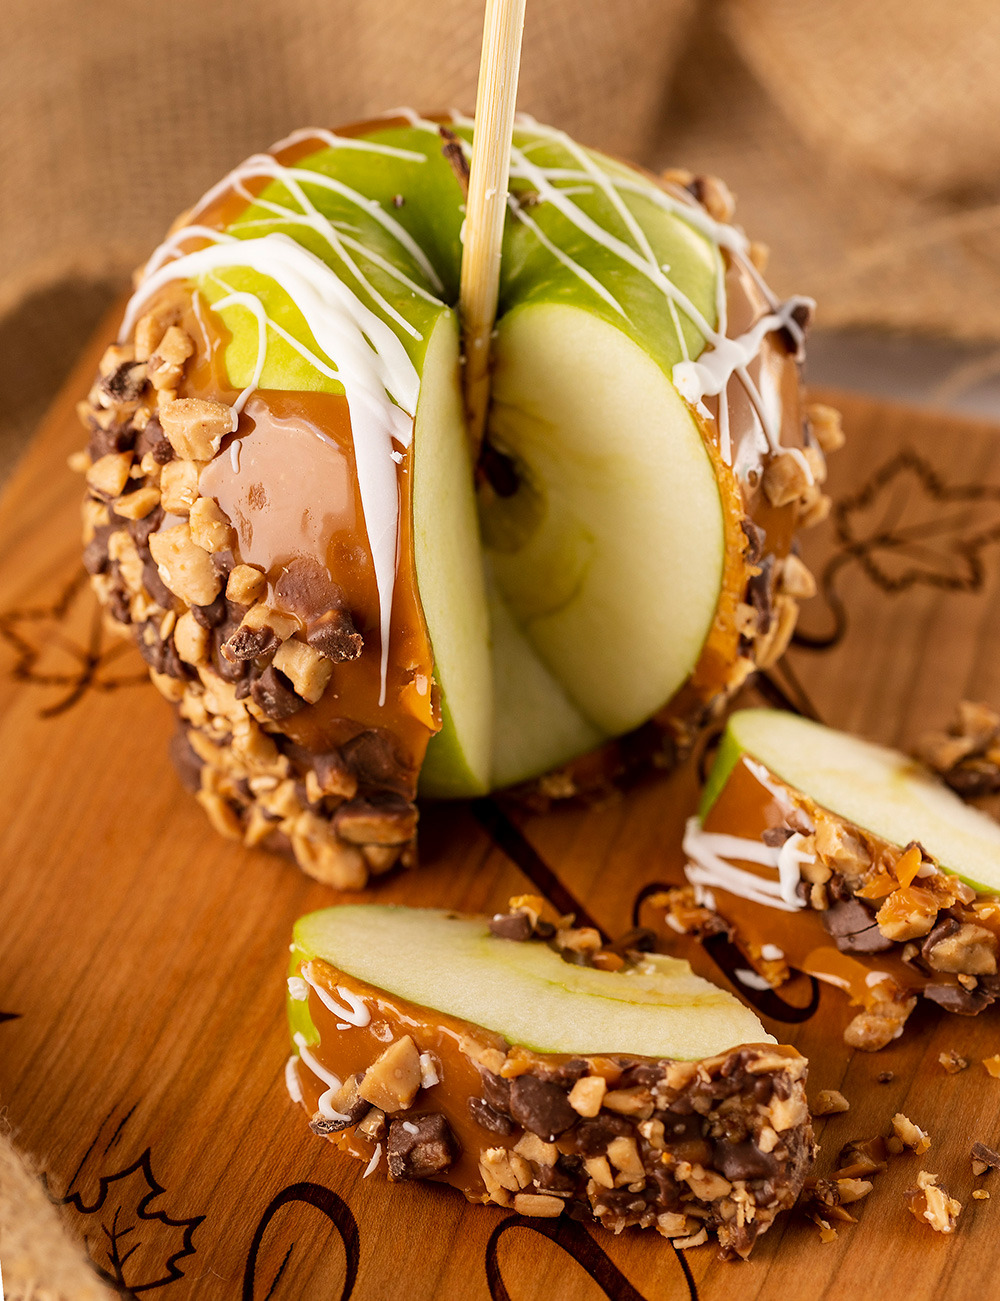 Sweet Traditions: Caramel apples are available daily at Sweet Traditions.